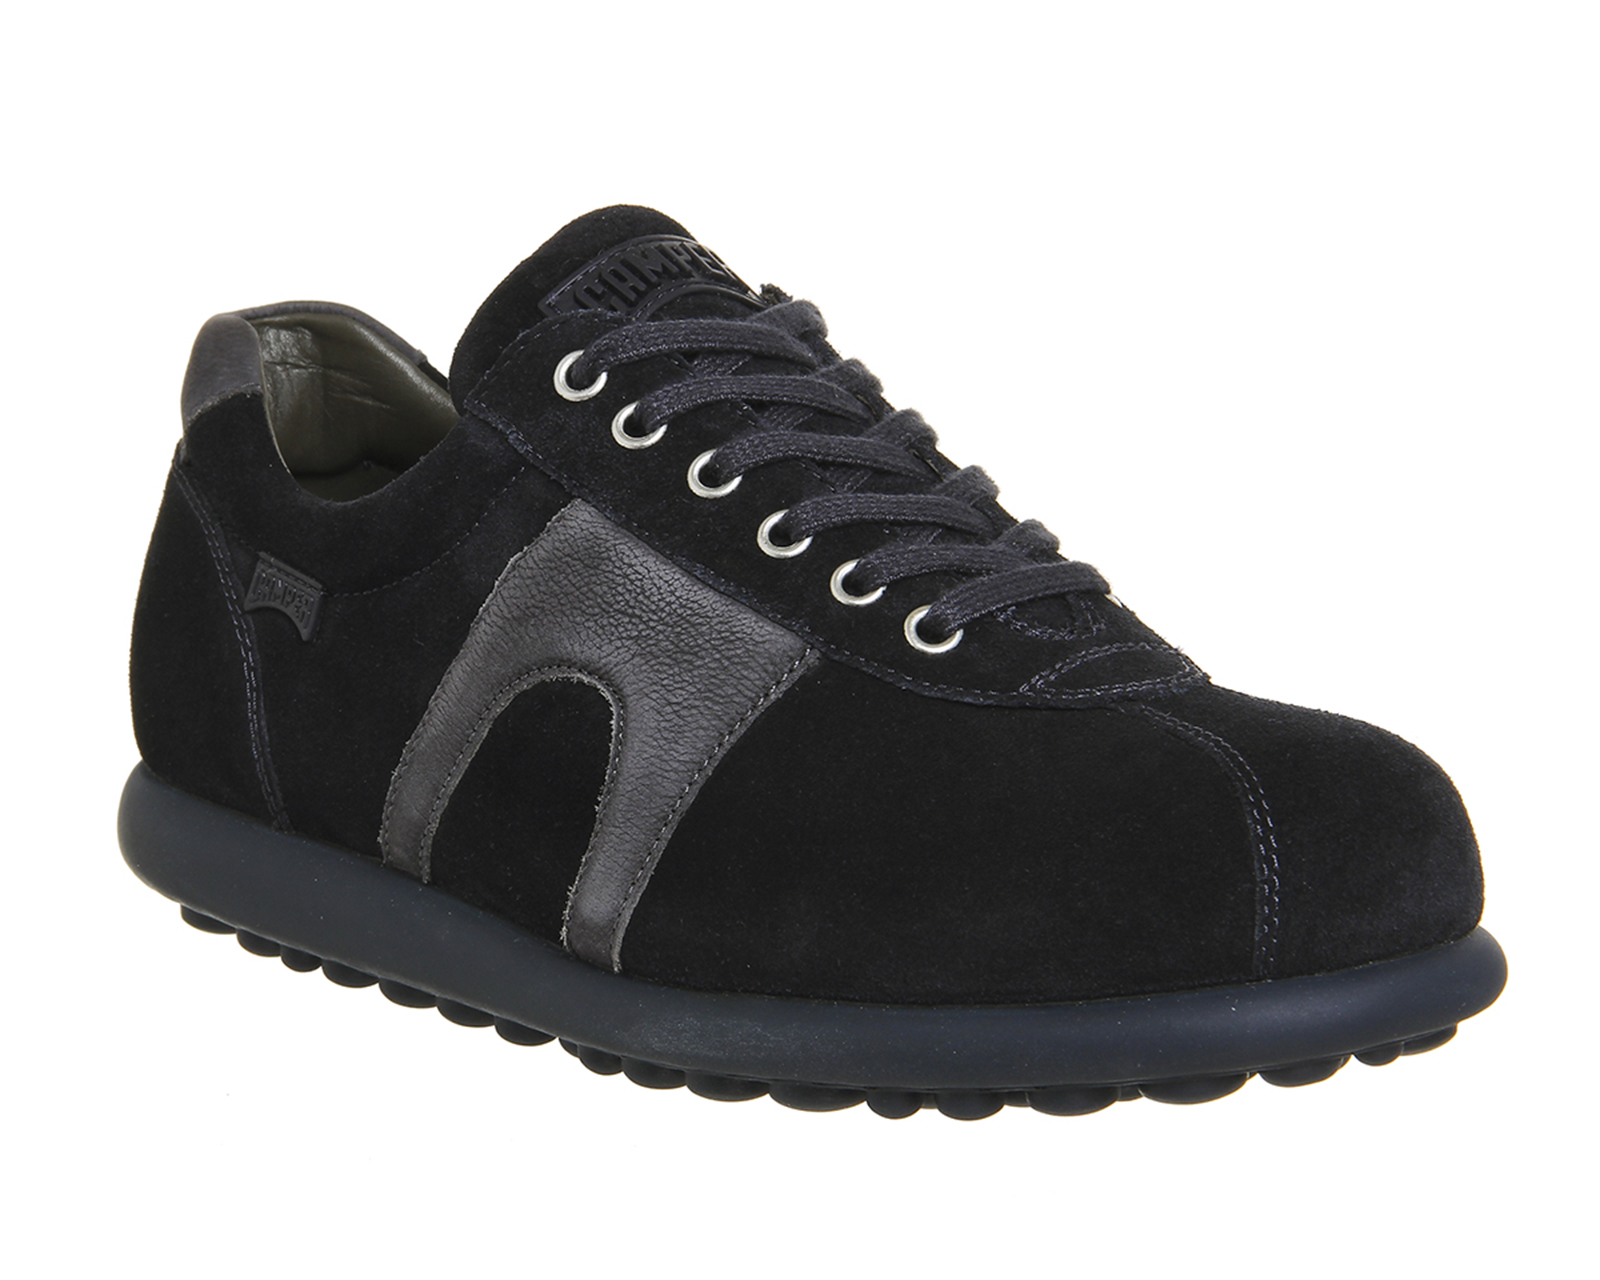 CamperPelotas Lace Up TrainersMidnight Blue Suede